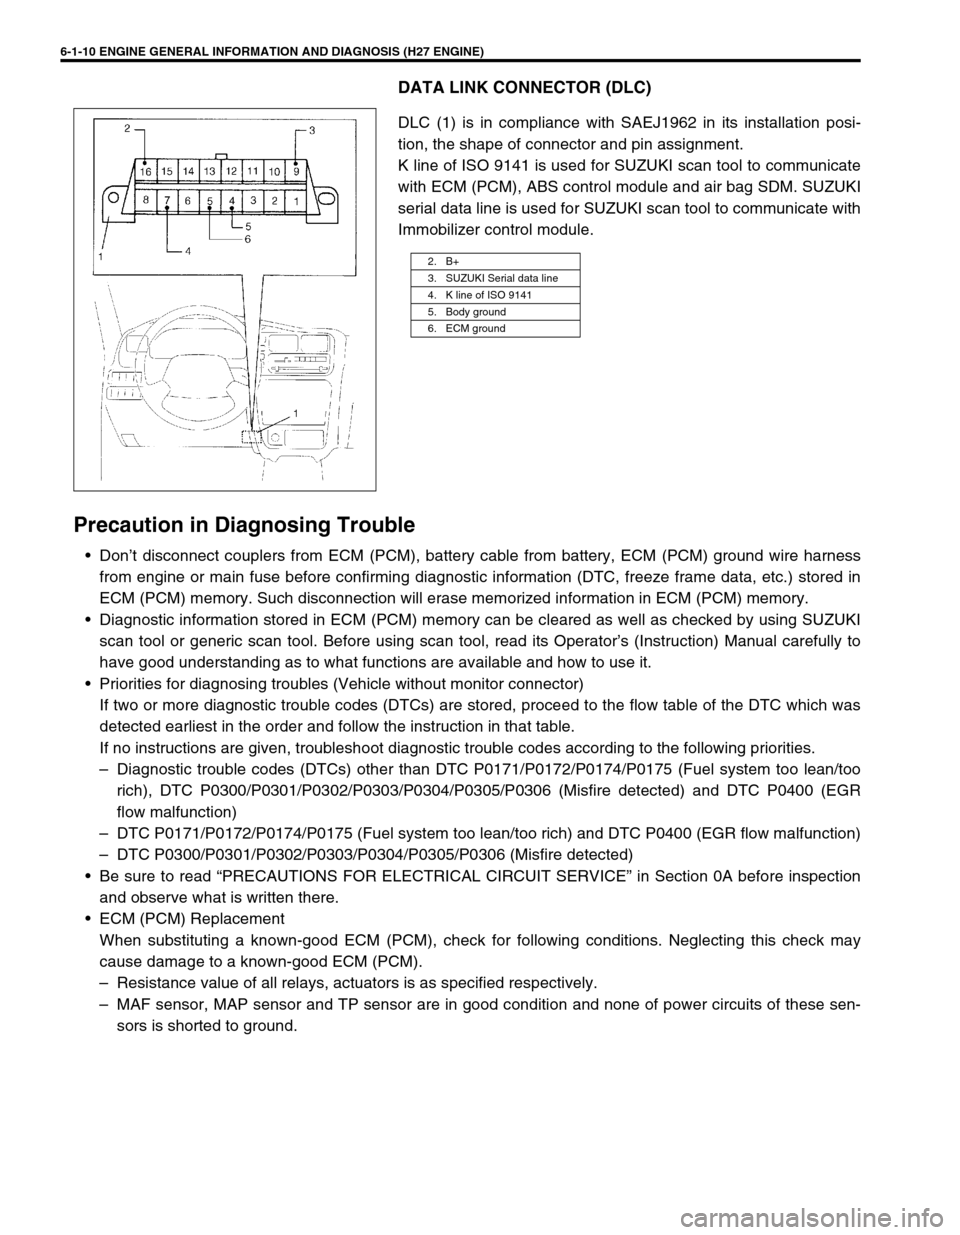 SUZUKI GRAND VITARA 1999 2.G Owners Manual 6-1-10 ENGINE GENERAL INFORMATION AND DIAGNOSIS (H27 ENGINE)
DATA LINK CONNECTOR (DLC)
DLC (1) is in compliance with SAEJ1962 in its installation posi-
tion, the shape of connector and pin assignment.